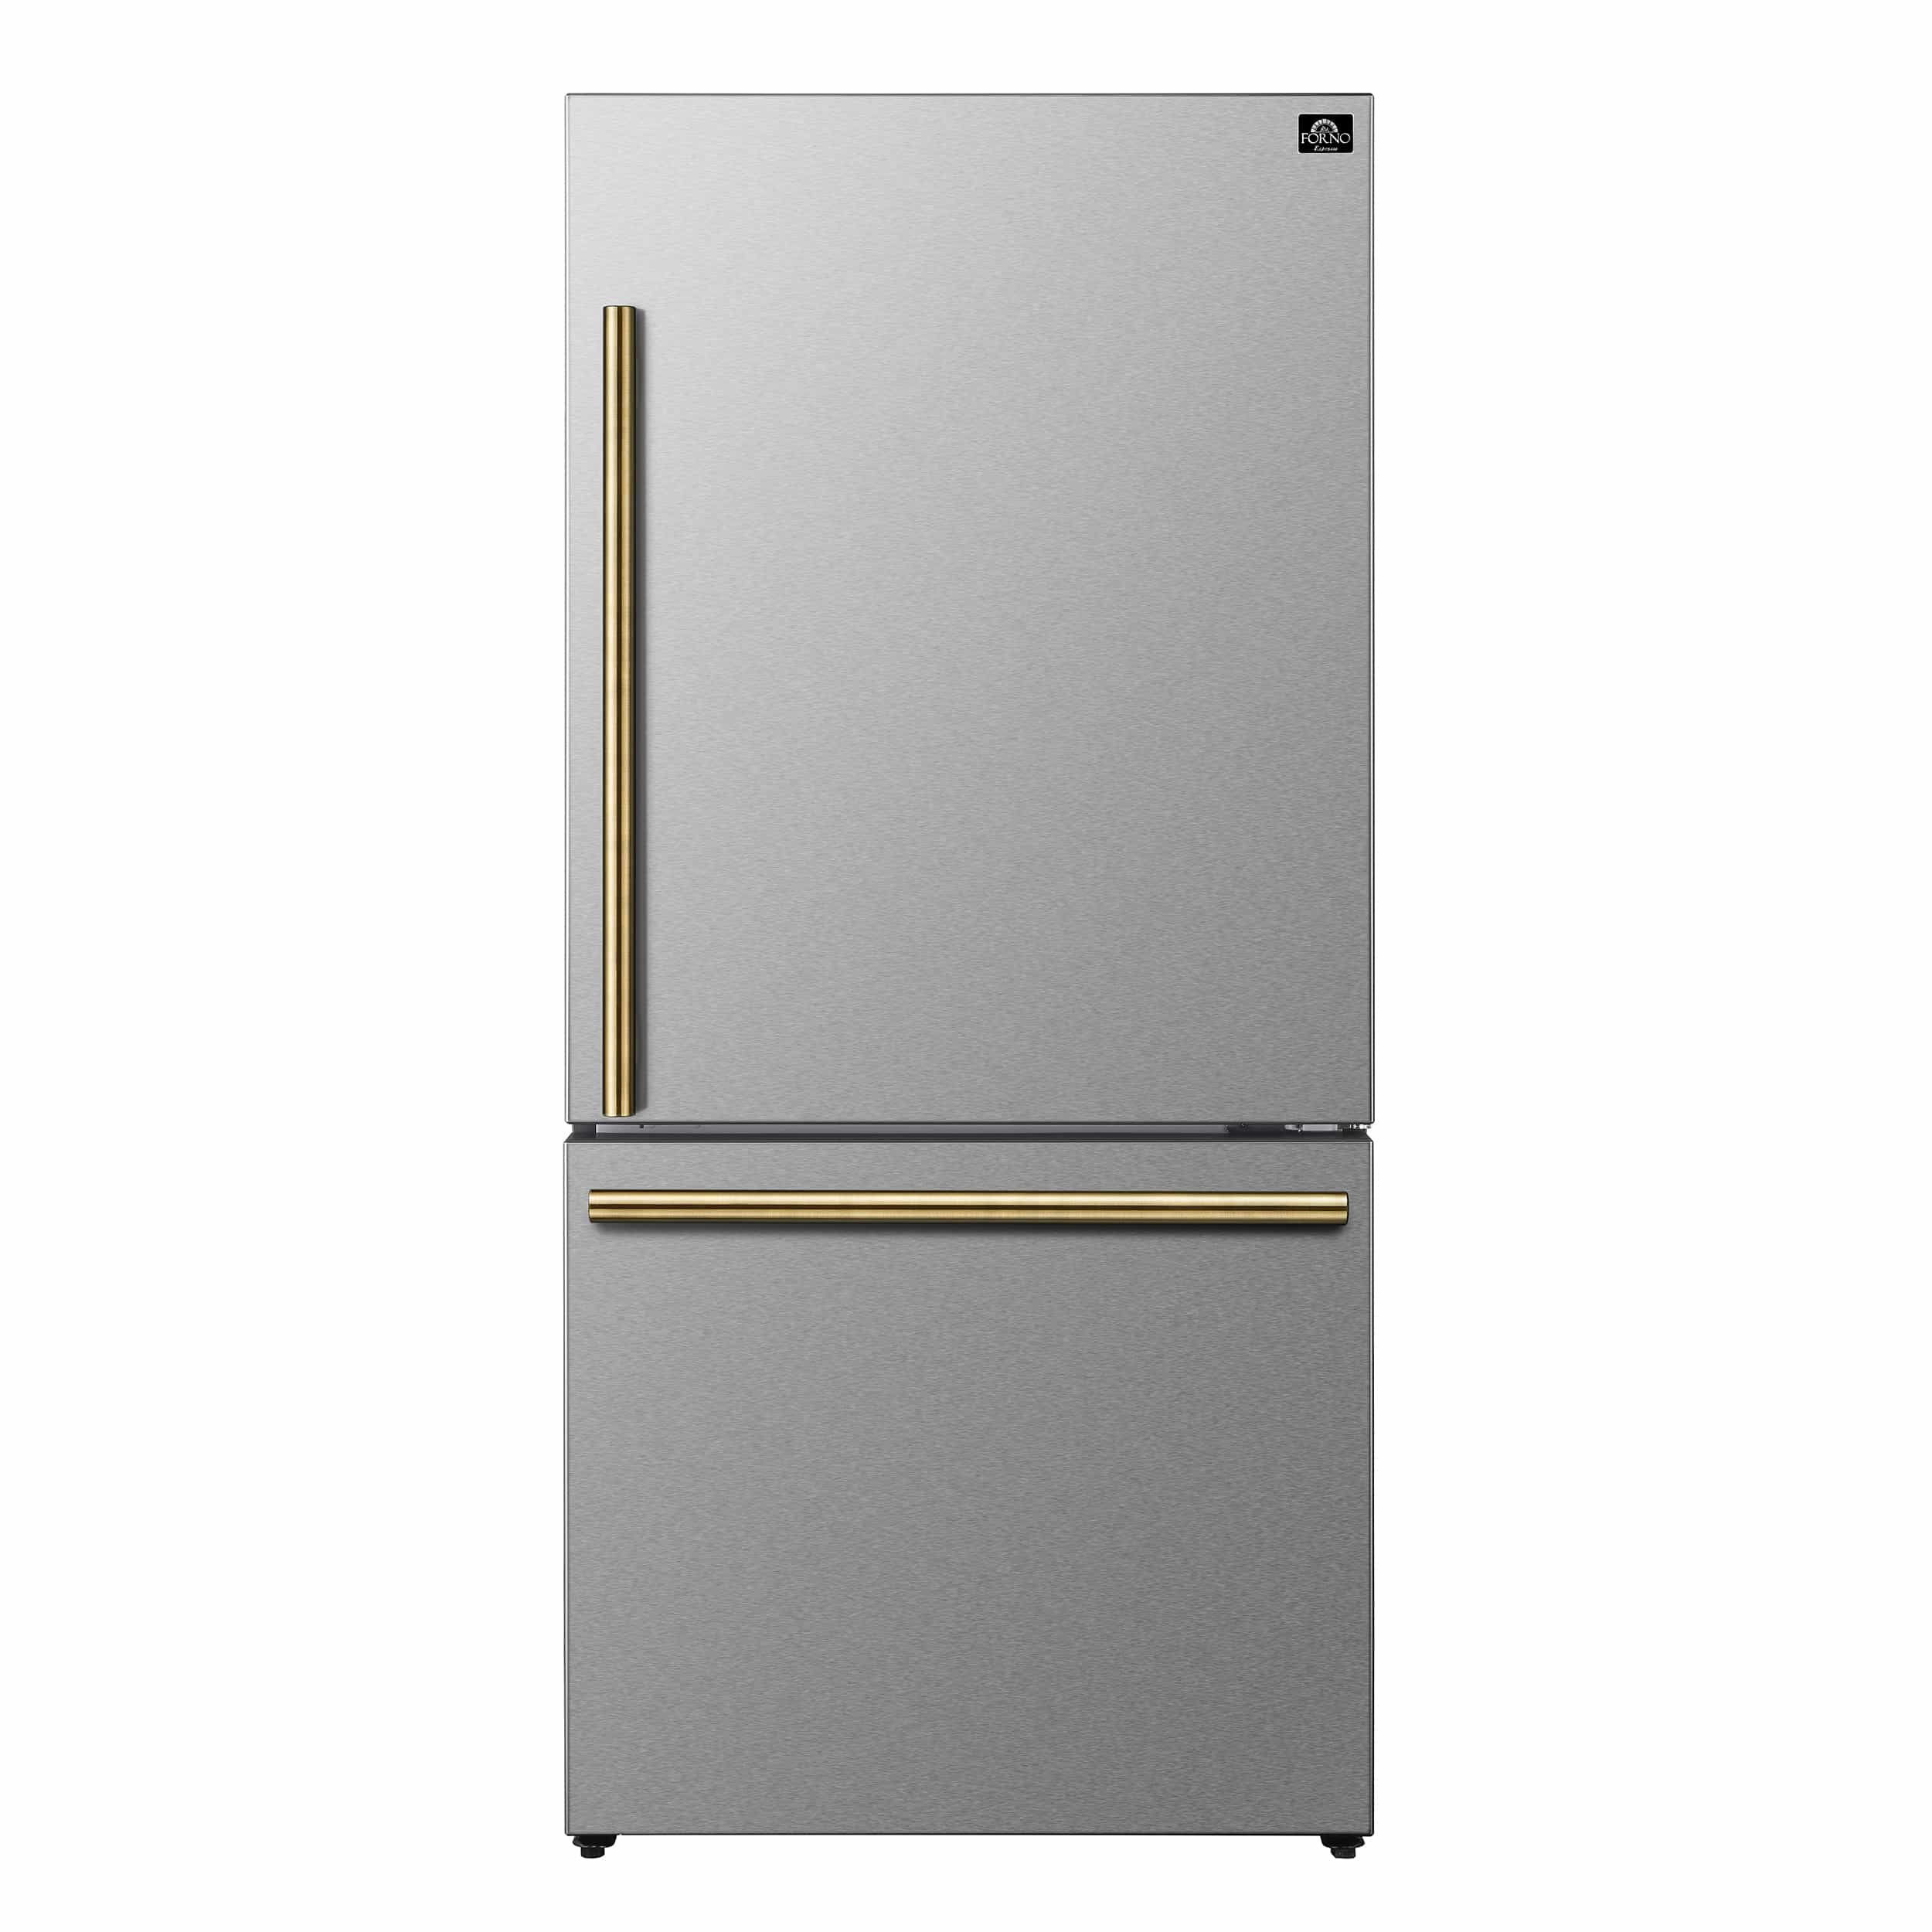 Forno Milano Espresso 31-Inch 17.2 cu. ft. Bottom Freezer Right Swing Door Refrigerator in Stainless Steel with Brass Handle  (FFFFD1785-31S) Wine Coolers Empire